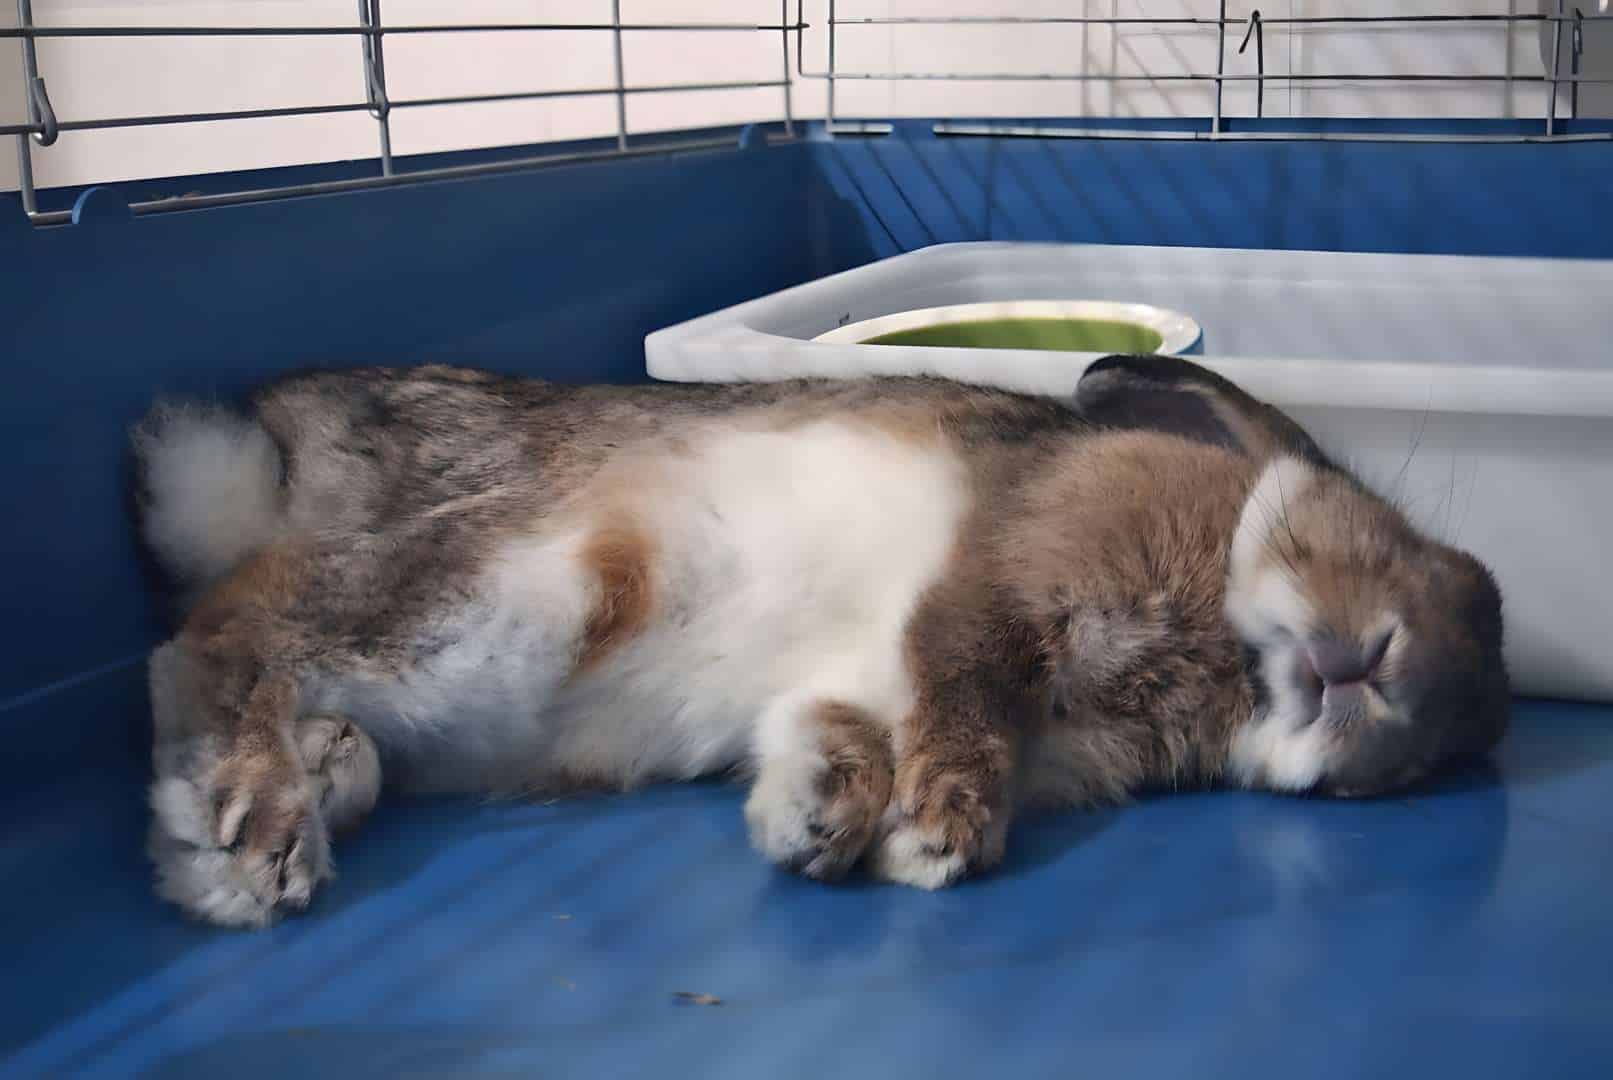 They flop and chill